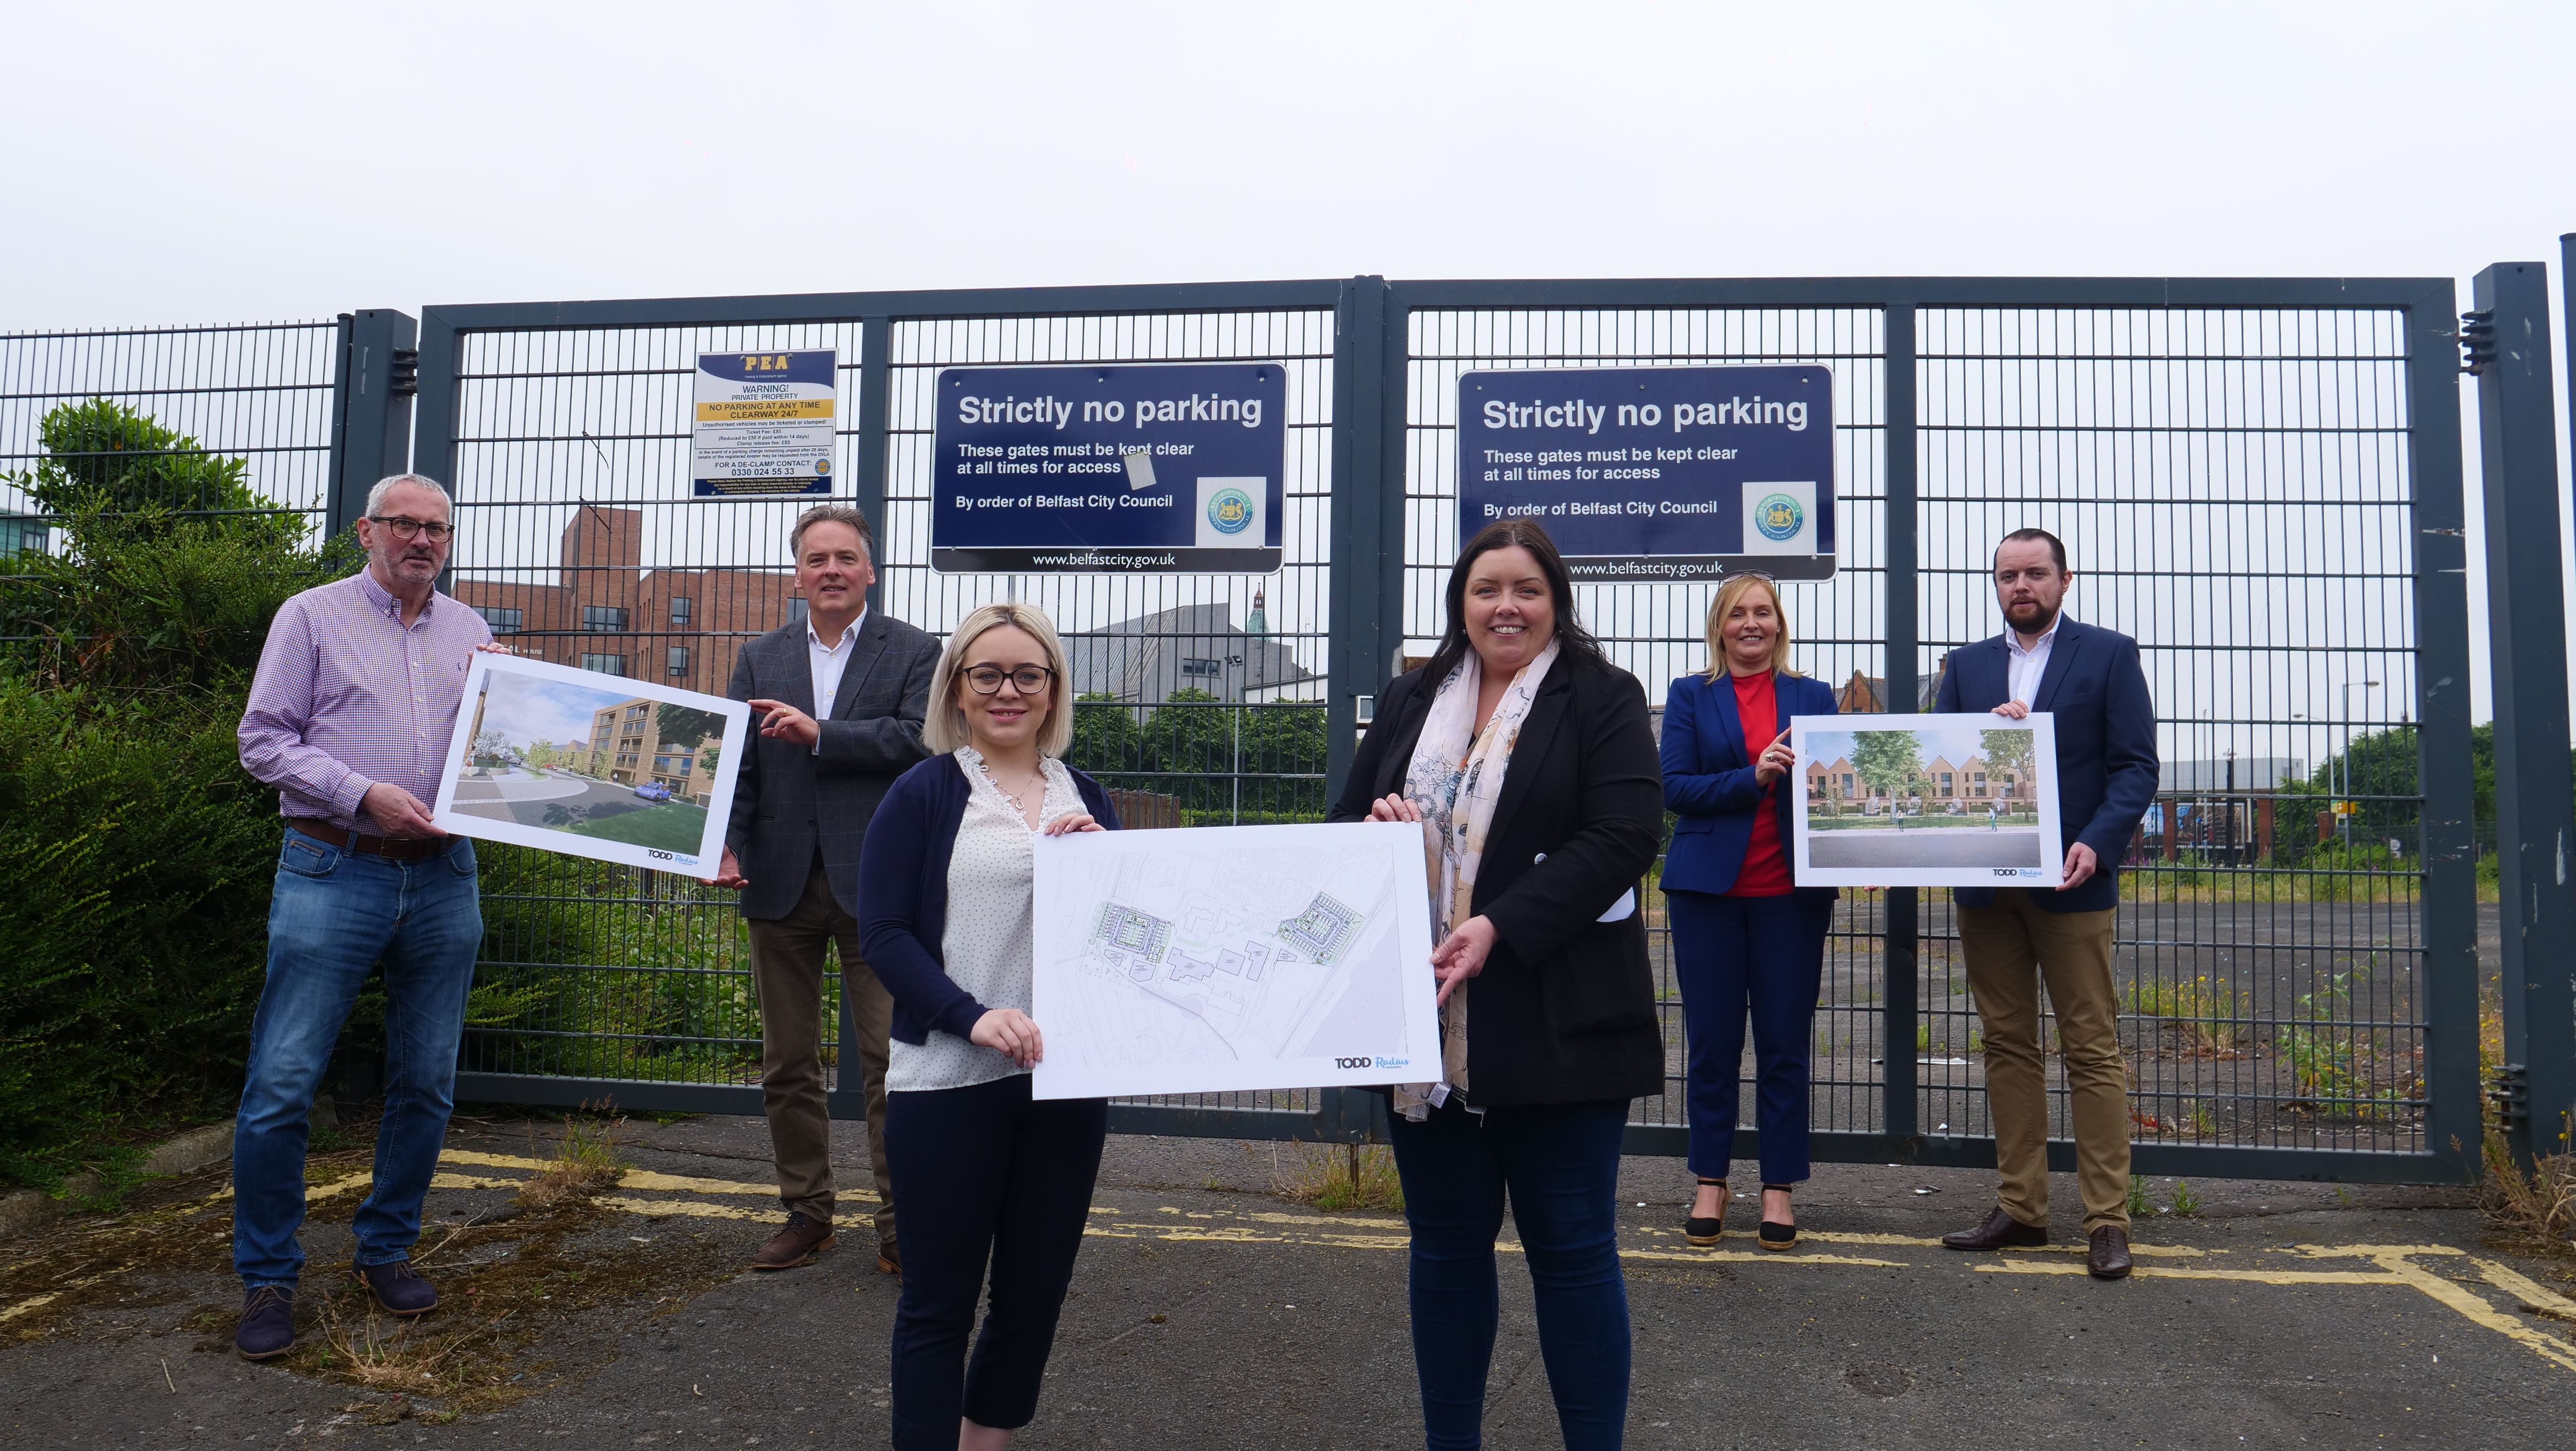 WELCOME NEWS: Communities Minister Deirdre Hargey joined the Market Development Association team to welcome the planning permission for 94 homes at the Gasworks 